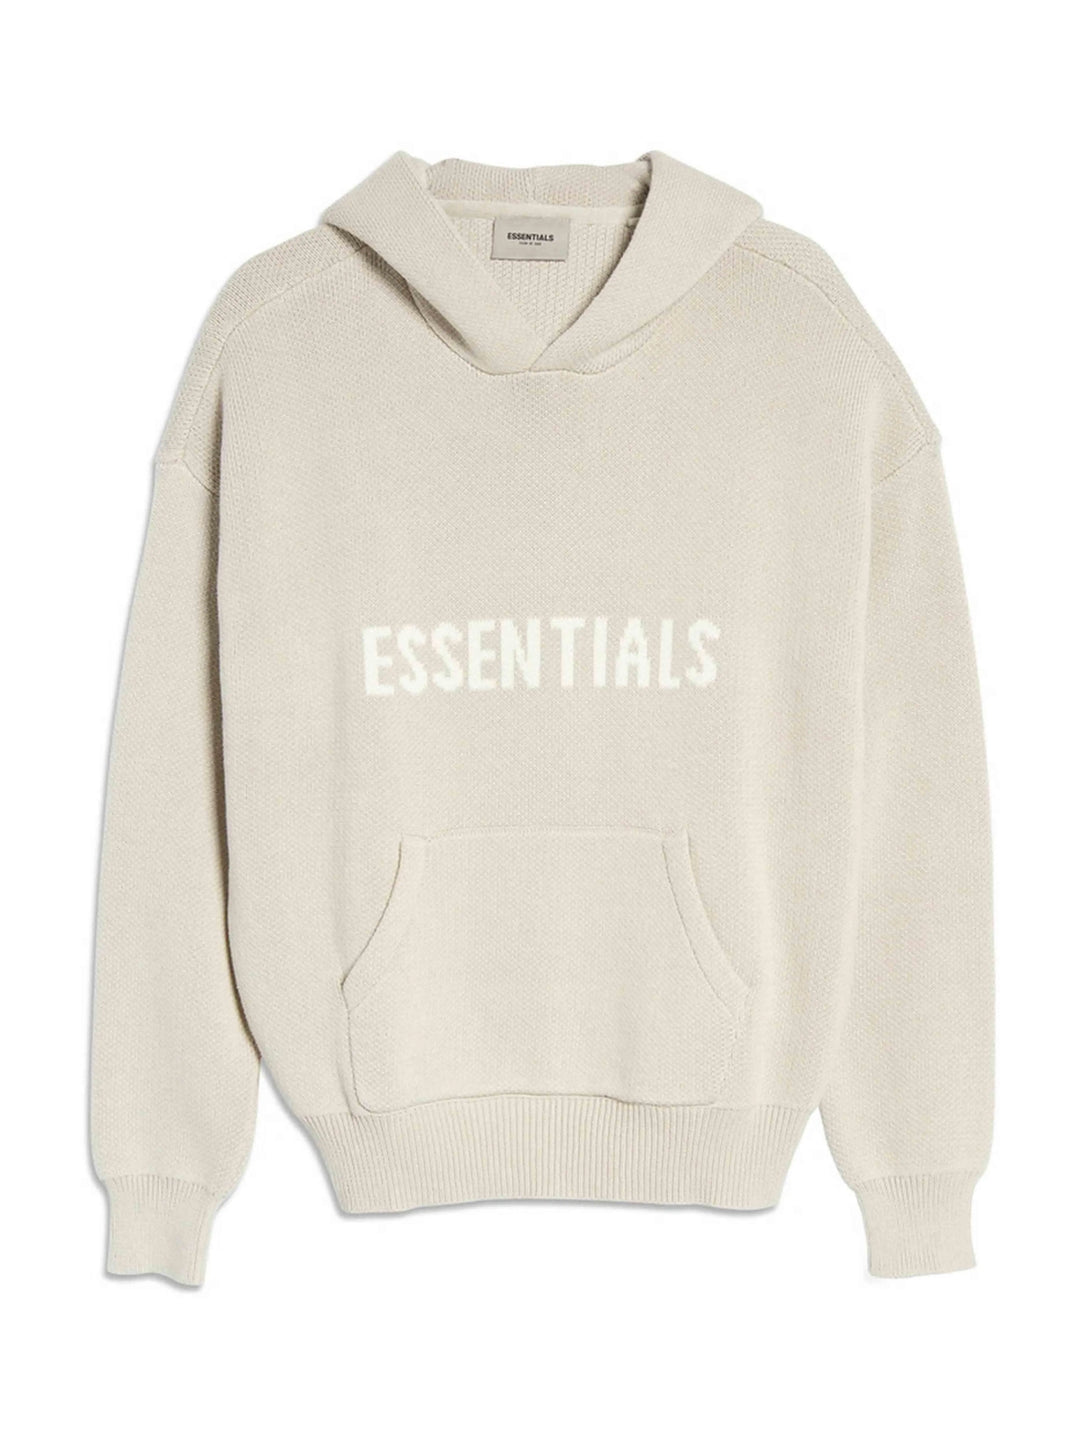 Fear Of God Essentials Knit Pullover Hoodie Oat [SS21] Prior